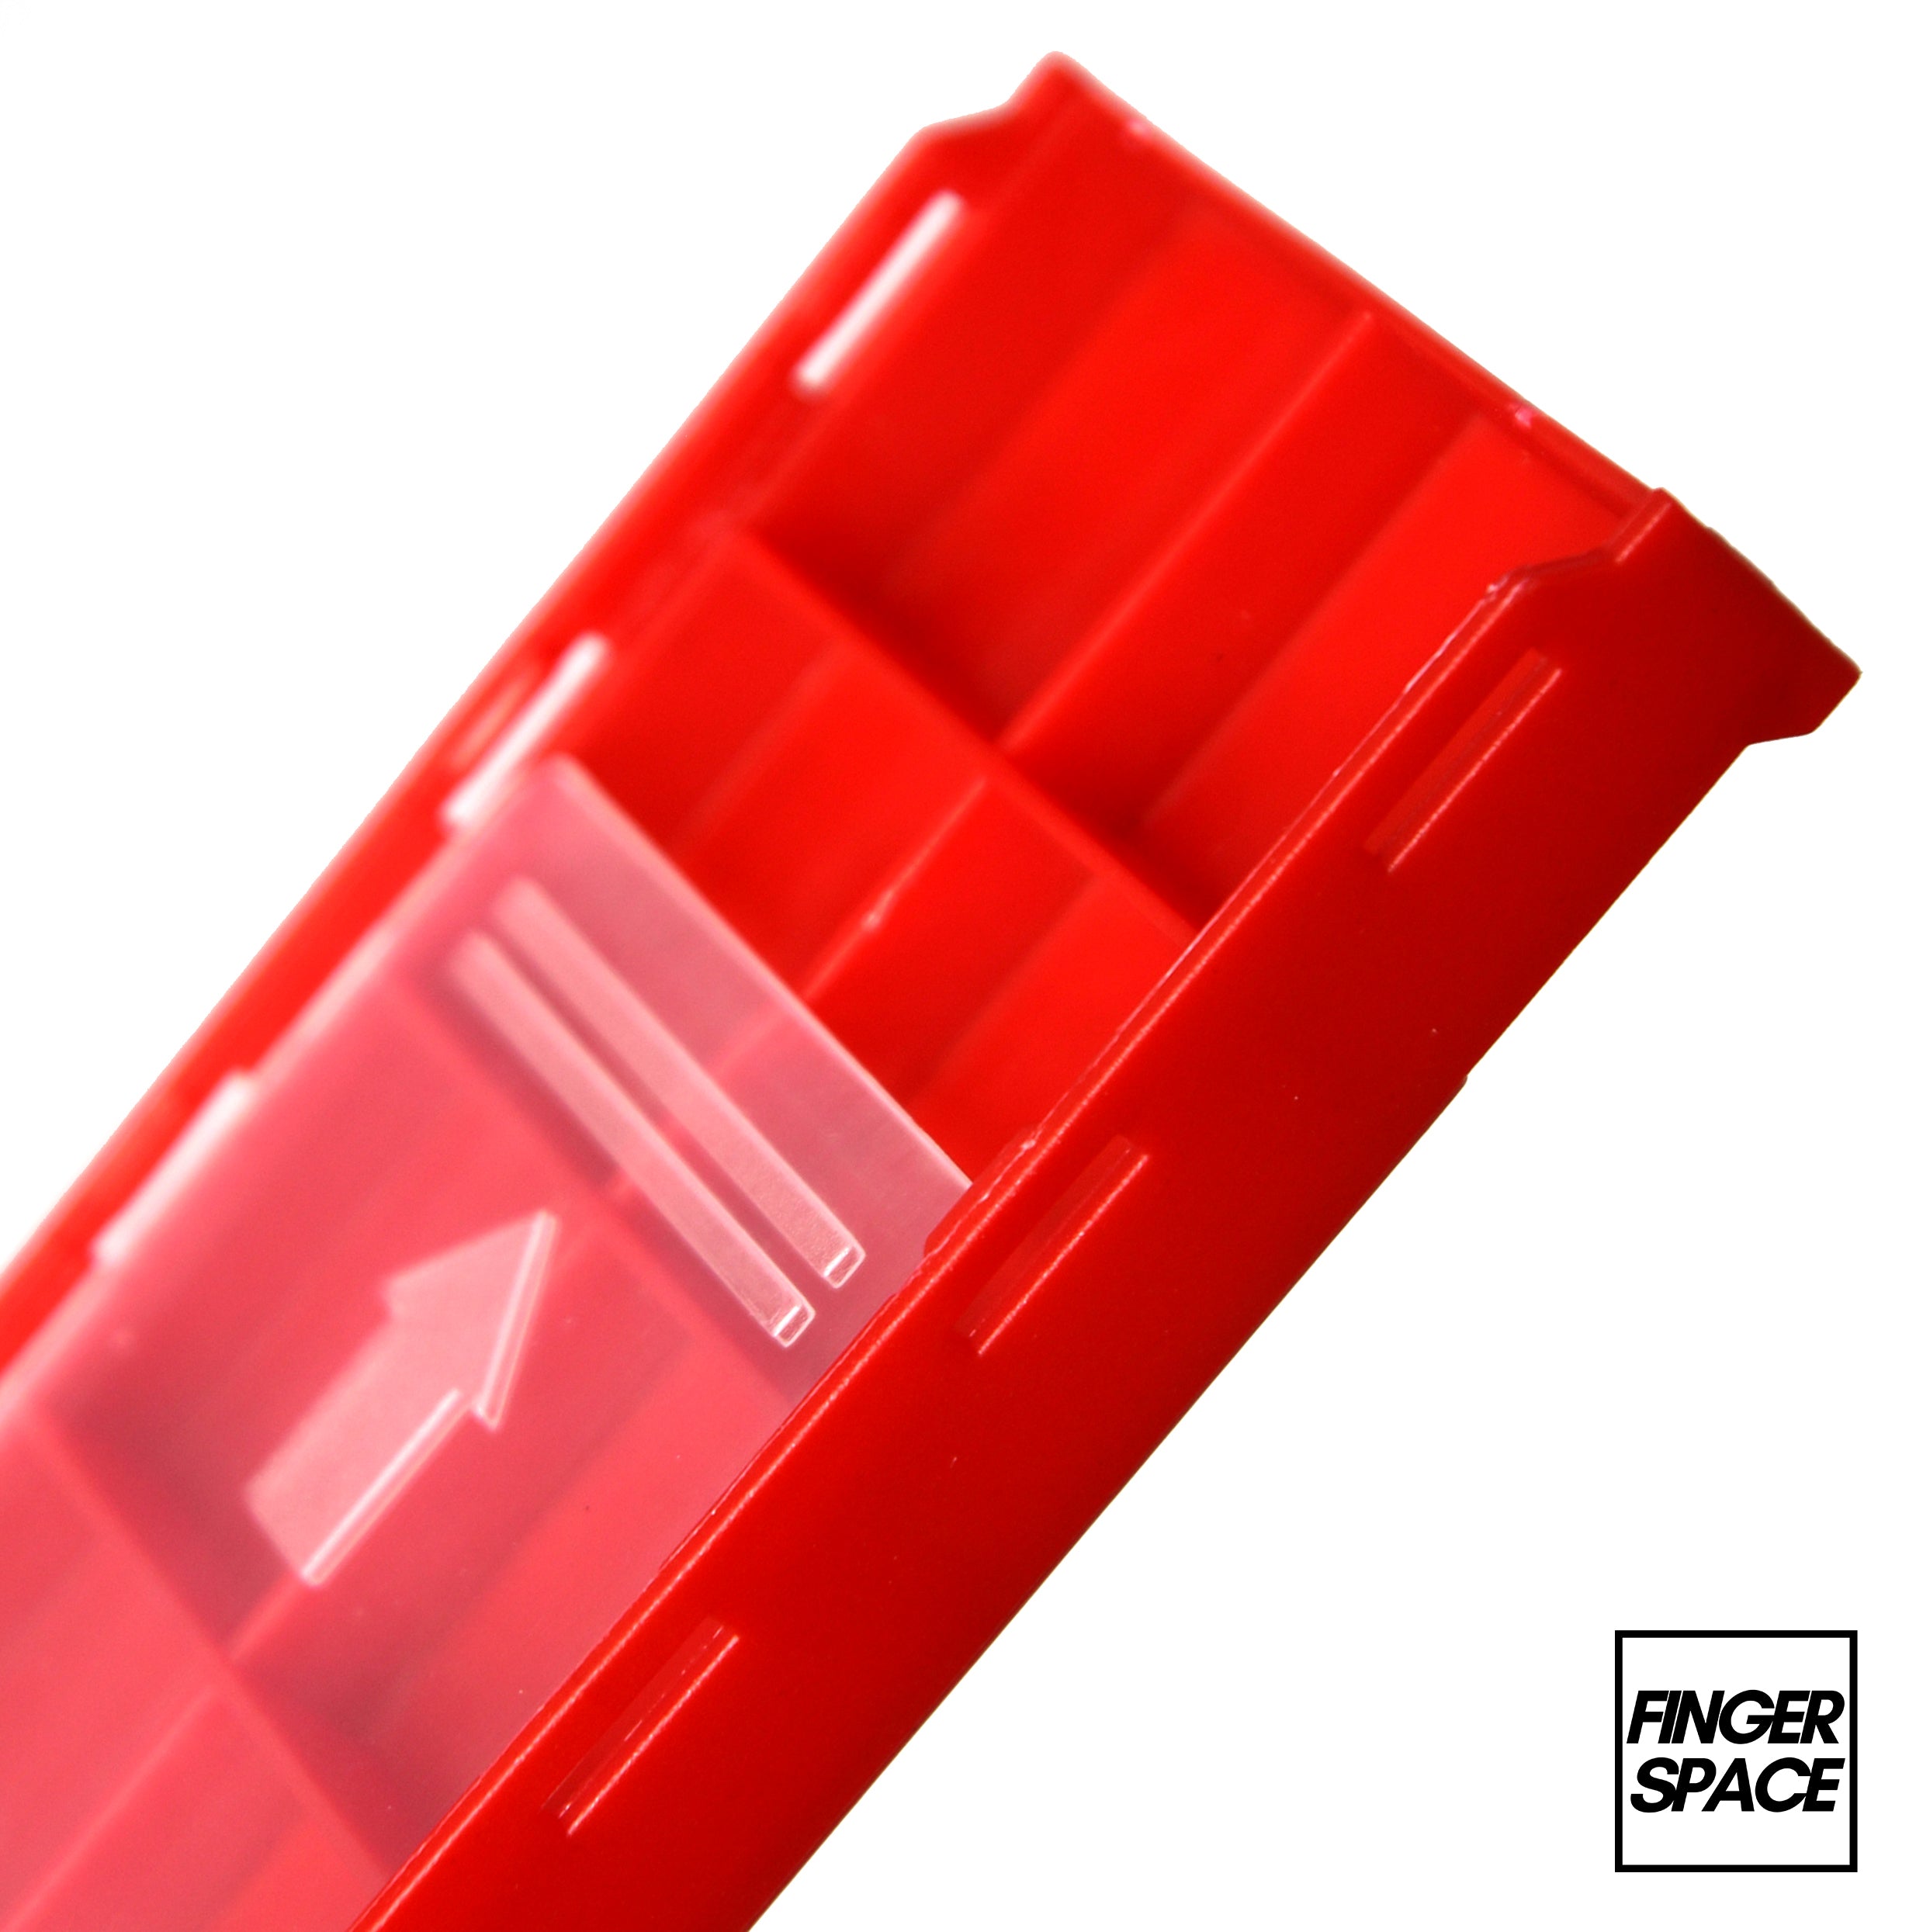 5-Pack of Mixed Color "Space Cases" - Modular Stacking Storage Boxes